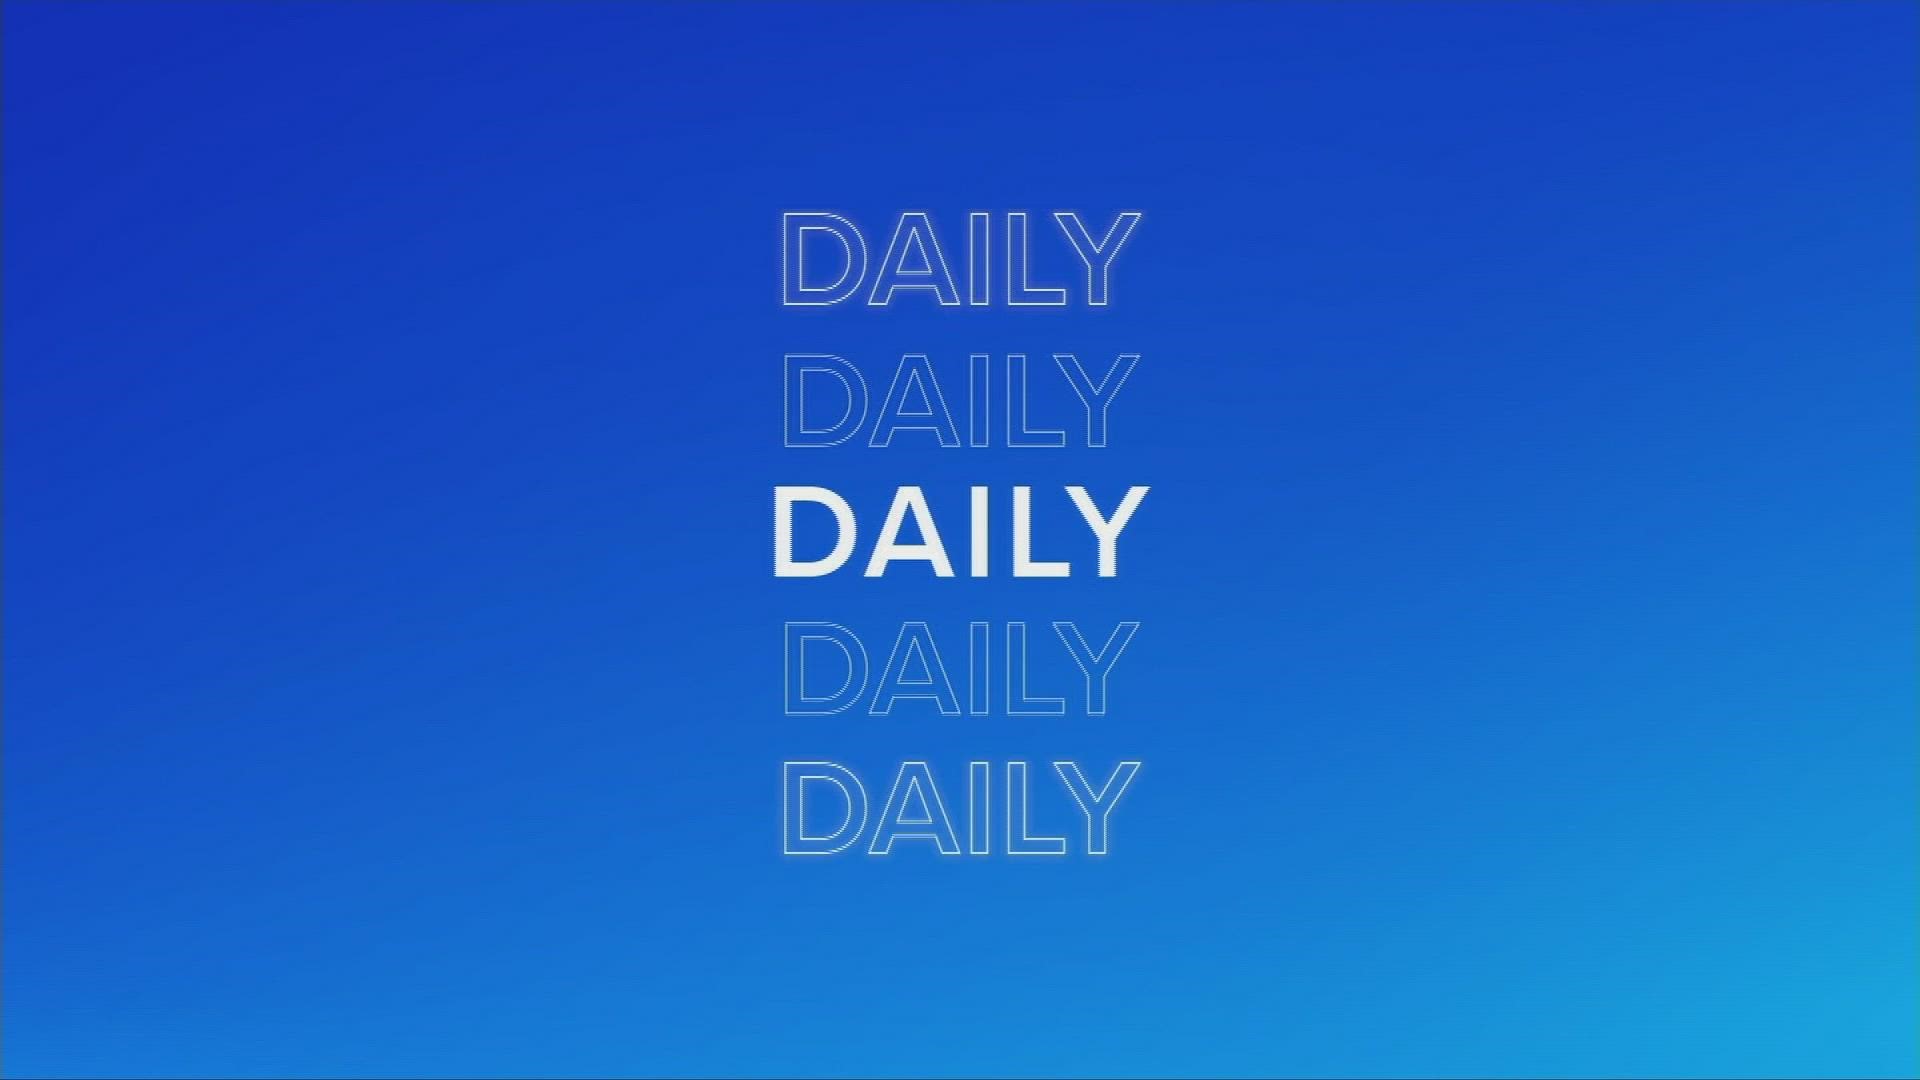 Police body camera video shows a huge fight where two police officers got punched after a high school basket game in today's 3News Daily with Stephanie Haney.